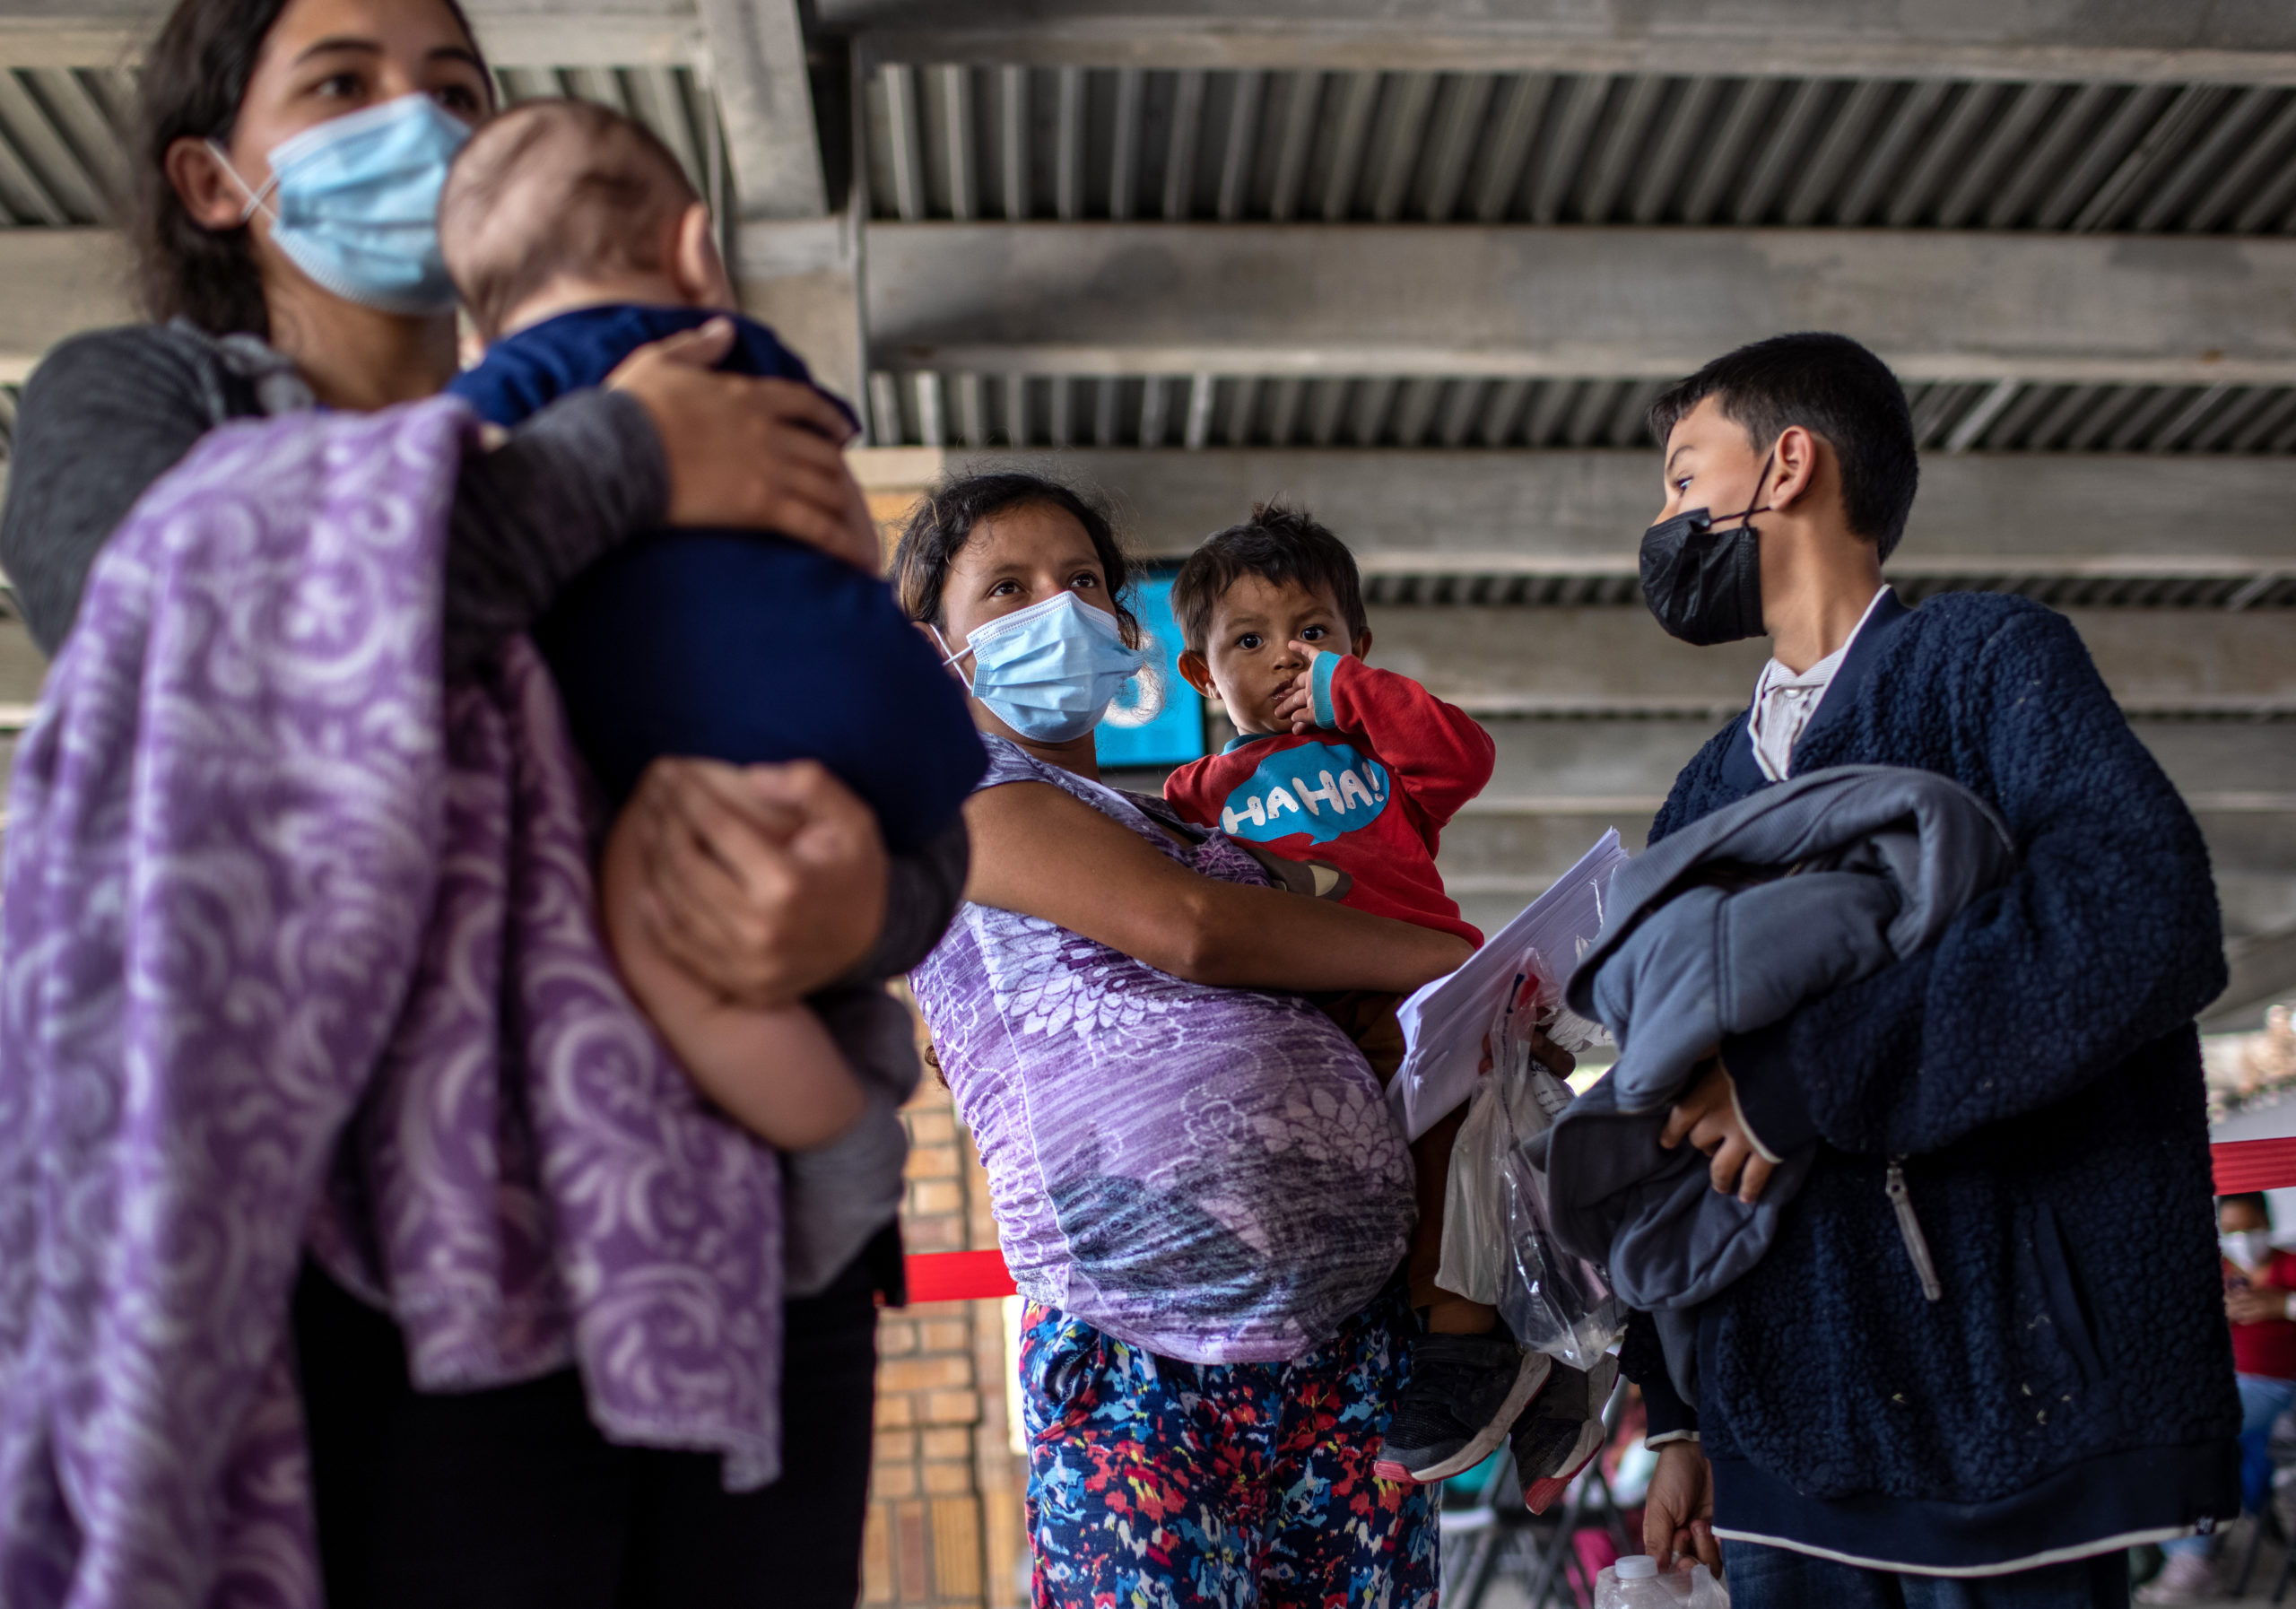 BROWNSVILLE, TEXAS - FEBRUARY 26: Central American asylum seekers arrive to a bus station after being released by U.S. Border Patrol agents on February 26, 2021 in Brownsville, Texas. U.S. immigration authorities are now releasing many asylum seeking families after they cross the U.S.-Mexico border and are taken into custody. The immigrant families are then free to travel to destinations throughout the U.S. while awaiting asylum hearings. (Photo by John Moore/Getty Images)